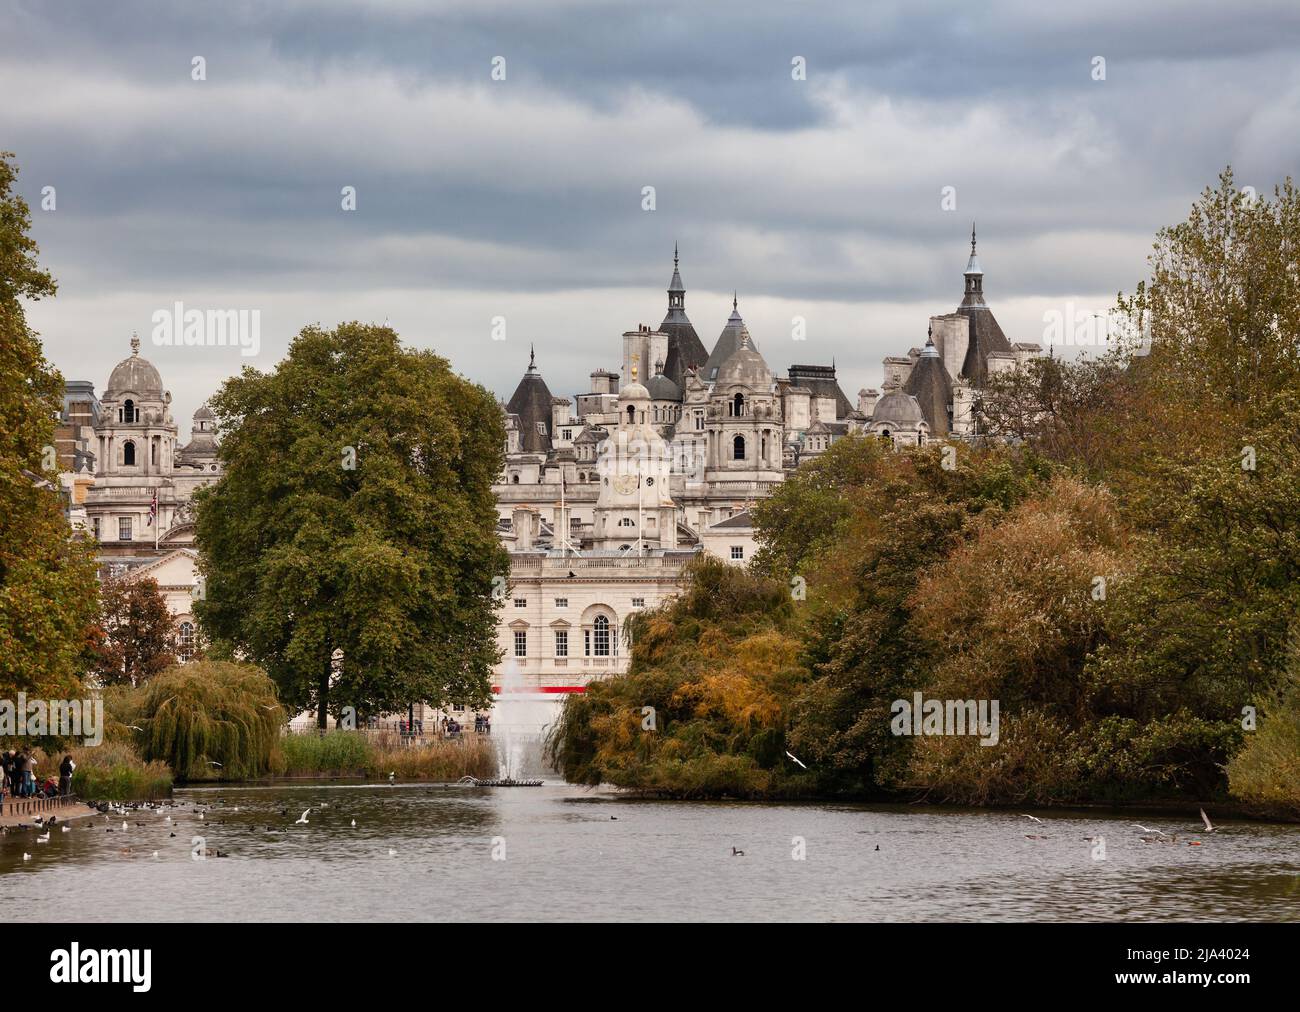 Autumn scene at St James's Park in Central London, UK. Horse Guards road buildings are seen in background Stock Photo